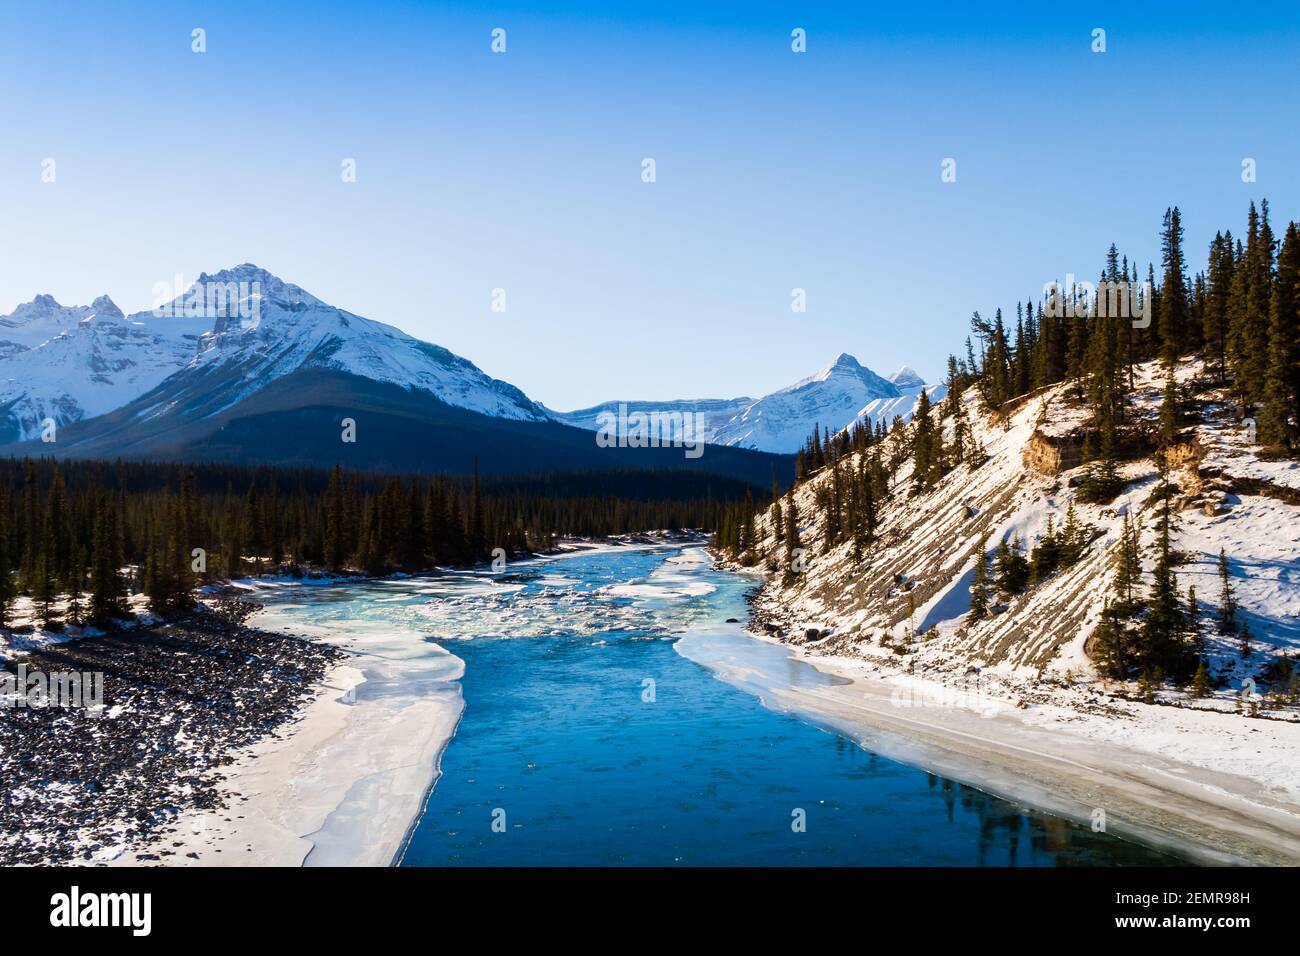 Beautiful landscape at Saskatchewan River Crossing on the Icefields Parkway, Canada Stock Photo